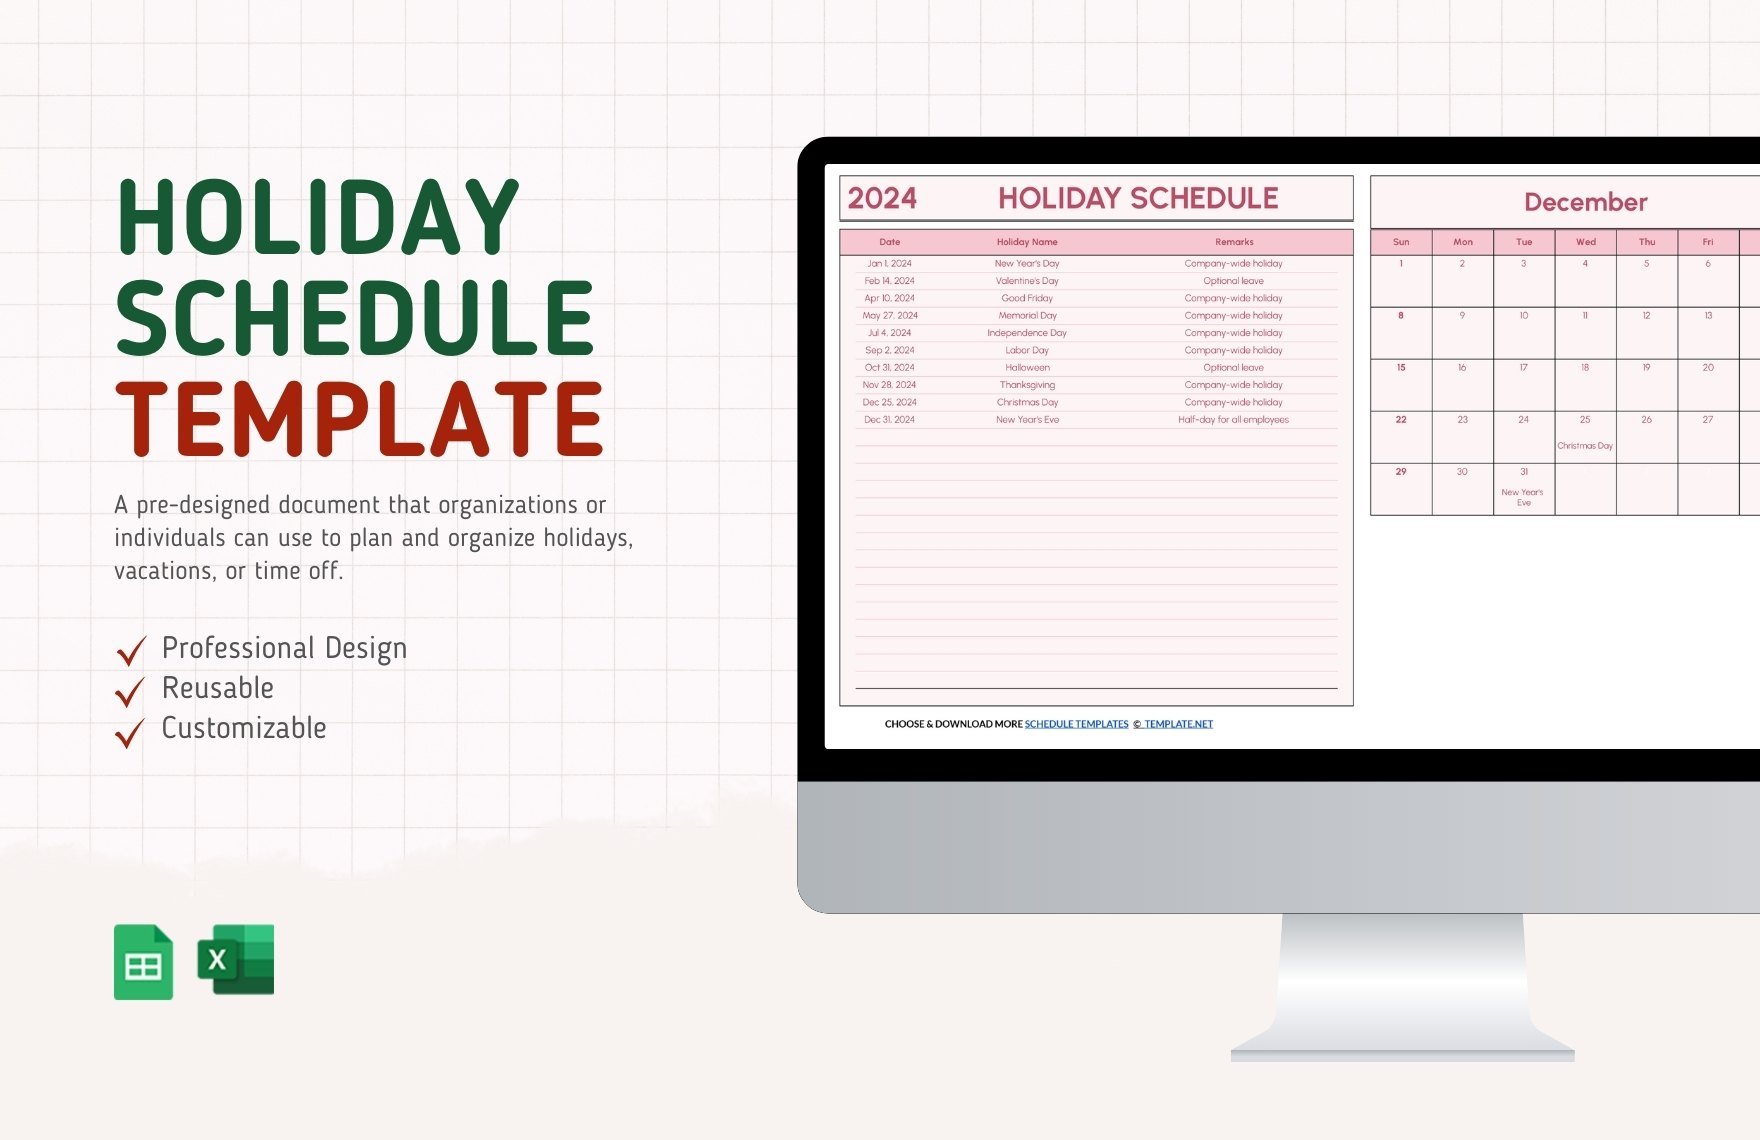 Holiday Schedule Template in Excel, Google Sheets